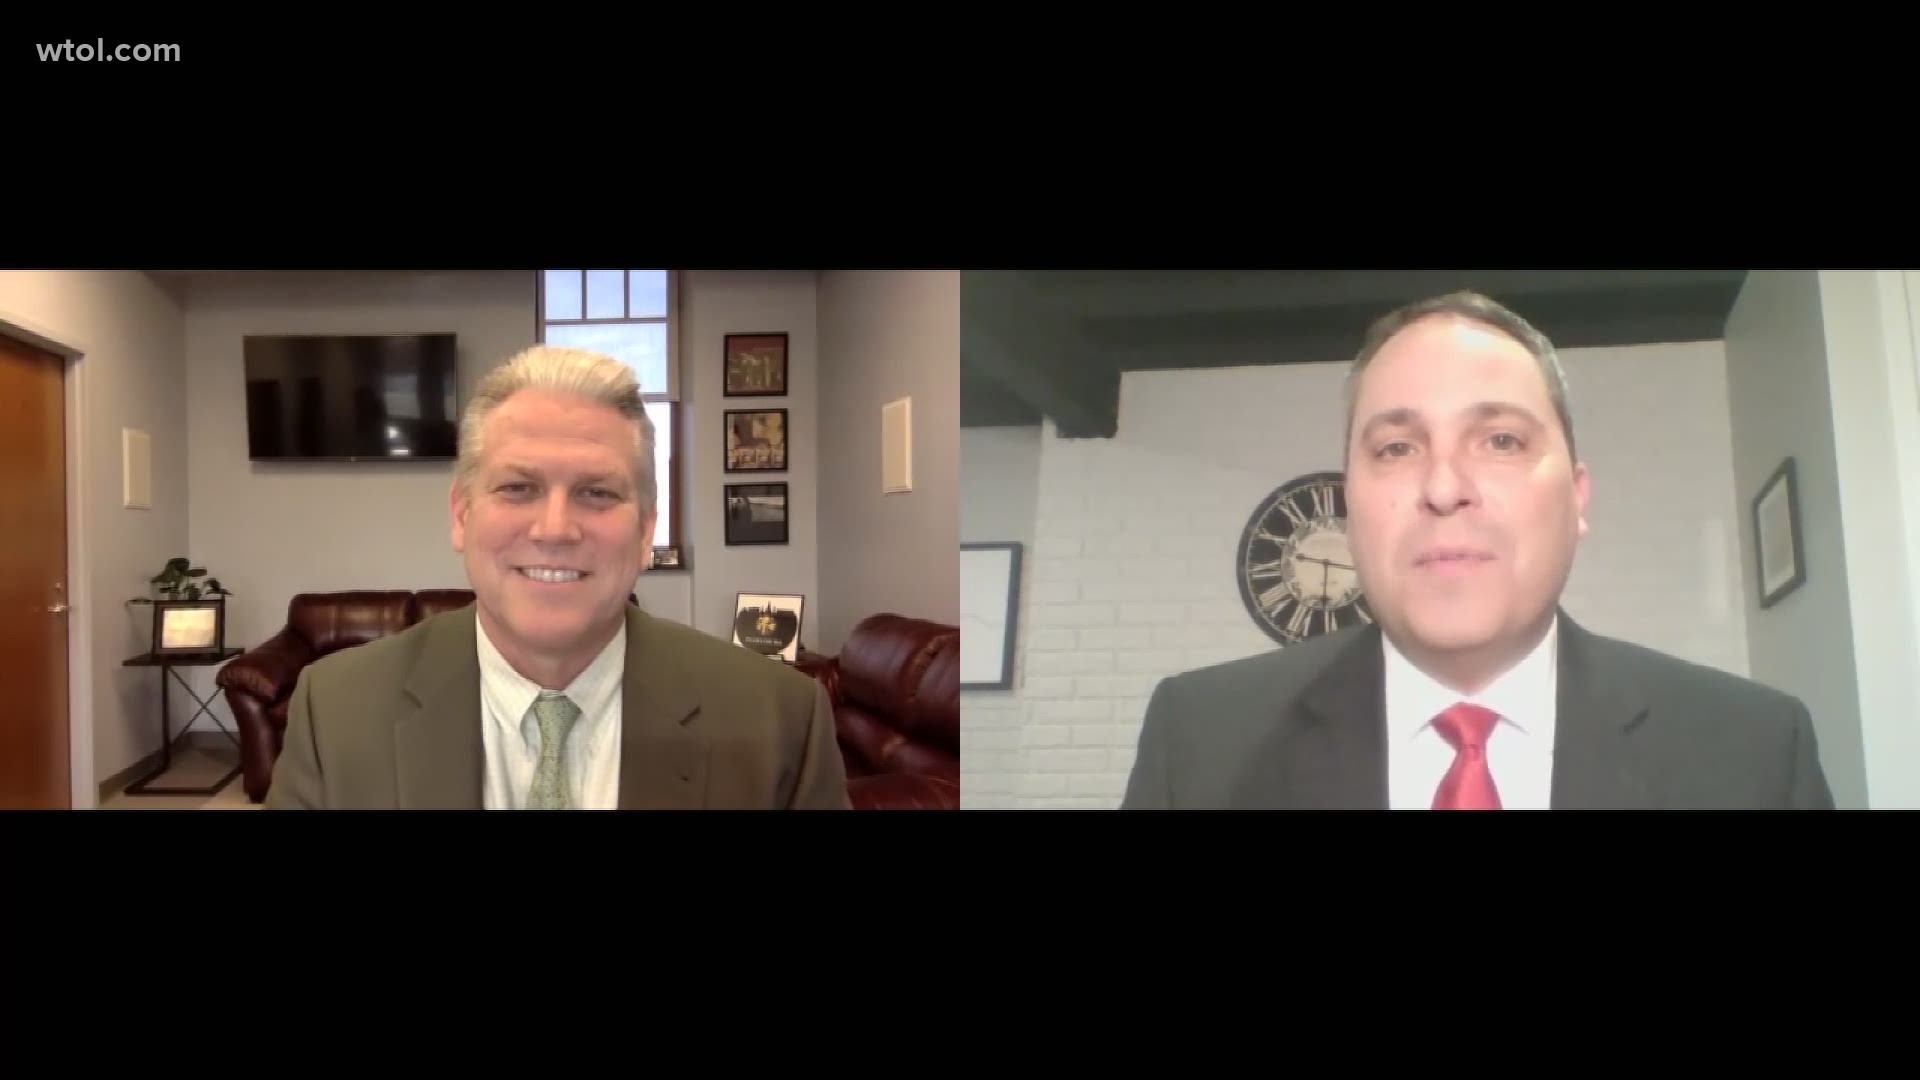 Leading Edge guest host and WTOL 11 morning anchor Tim Miller sits down with the Perrysburg school superintendent to talk testing and COVID-19 response in schools.